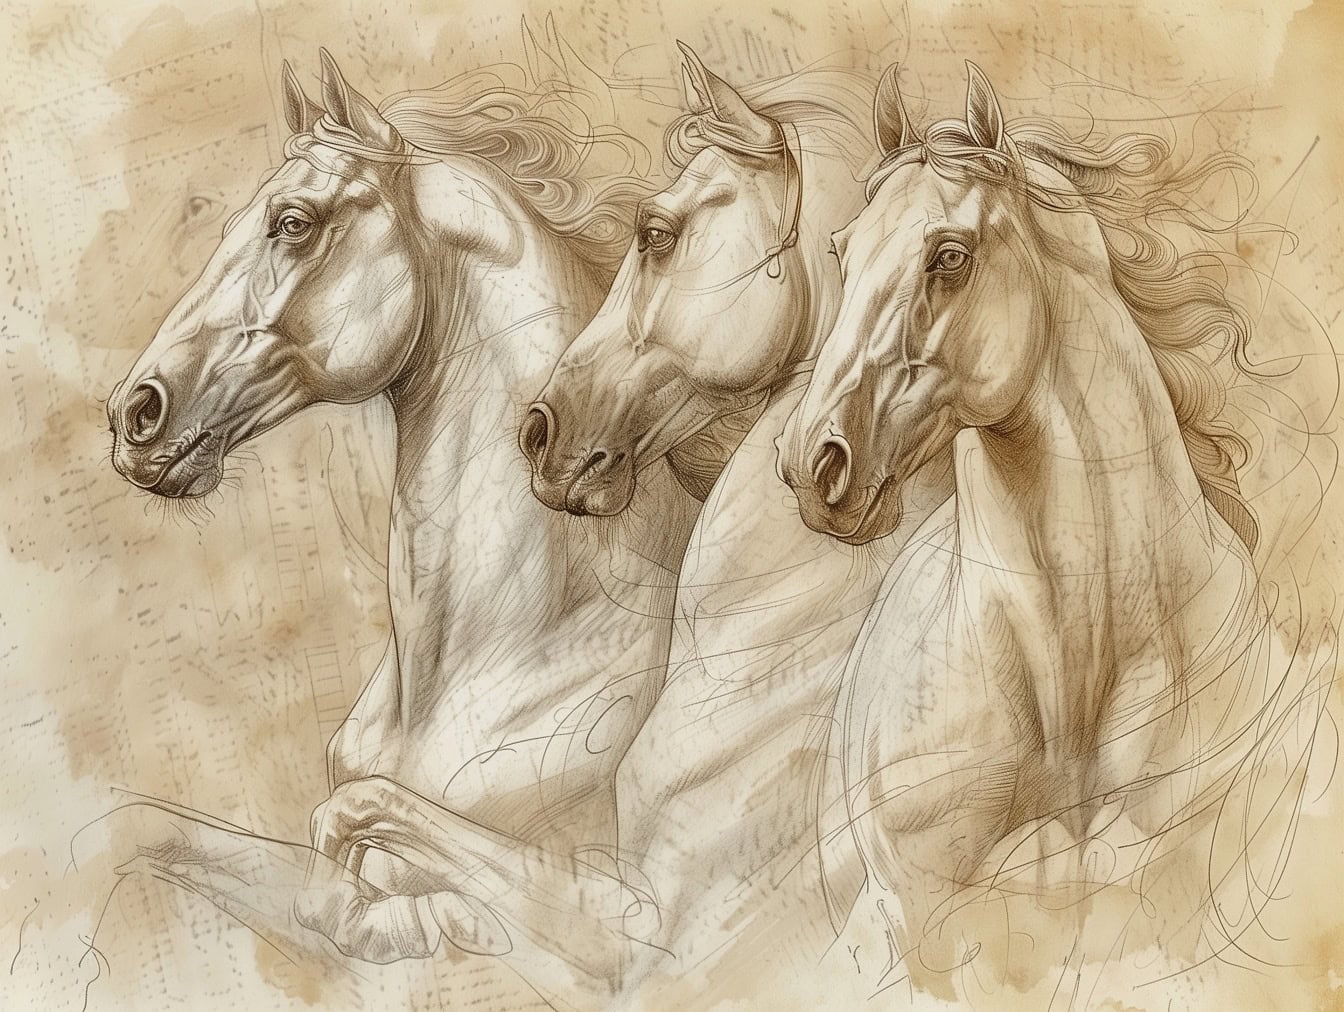 A hand drawing of horses on old faded semitransparent paper in a style of artwork of medieval artists